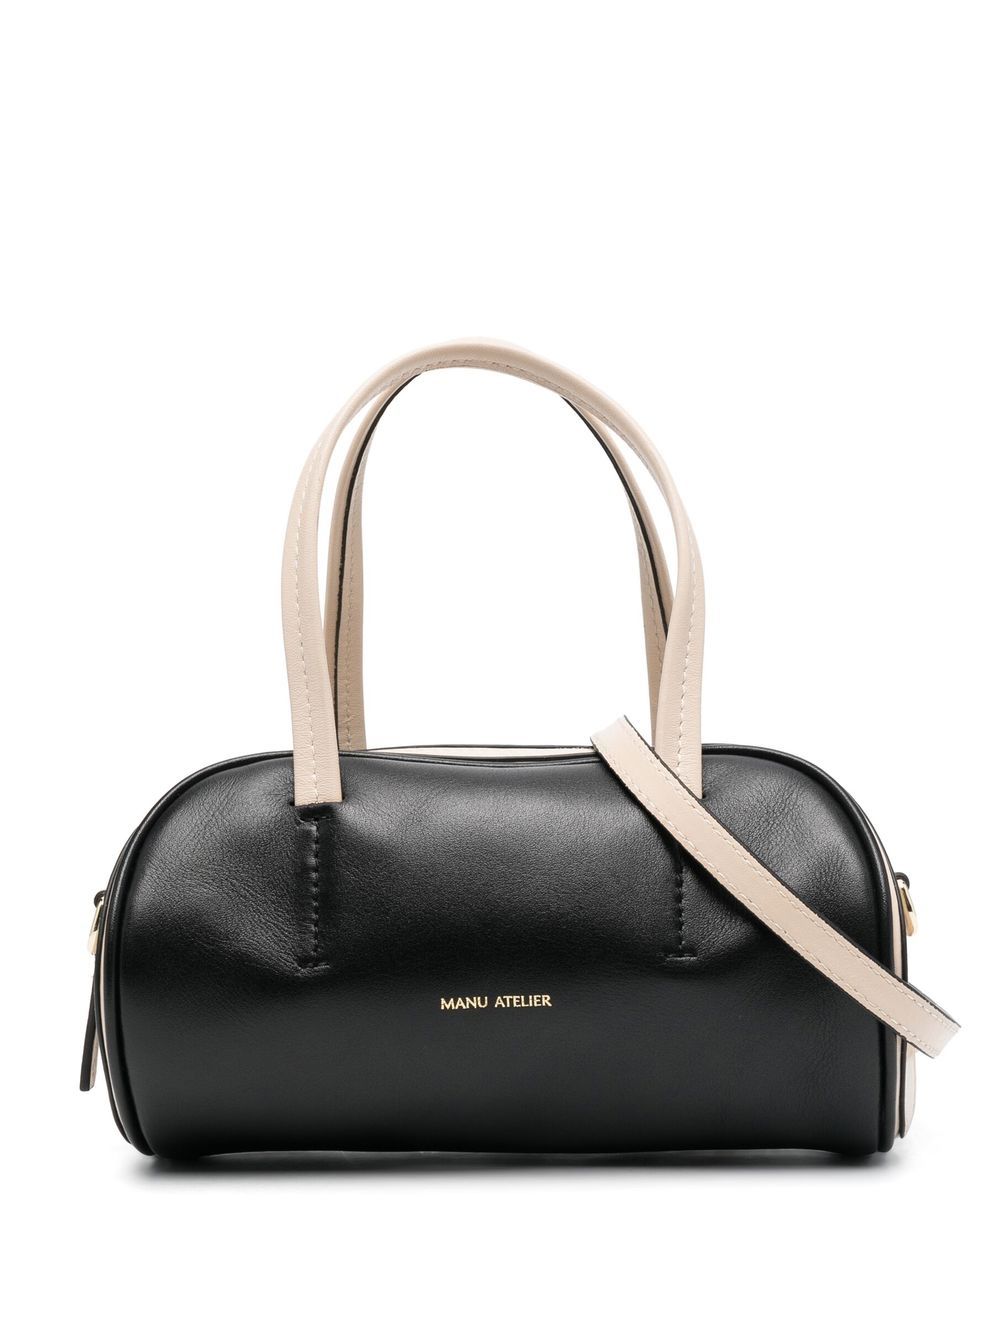 Manu Atelier Hourglass leather bowling bag